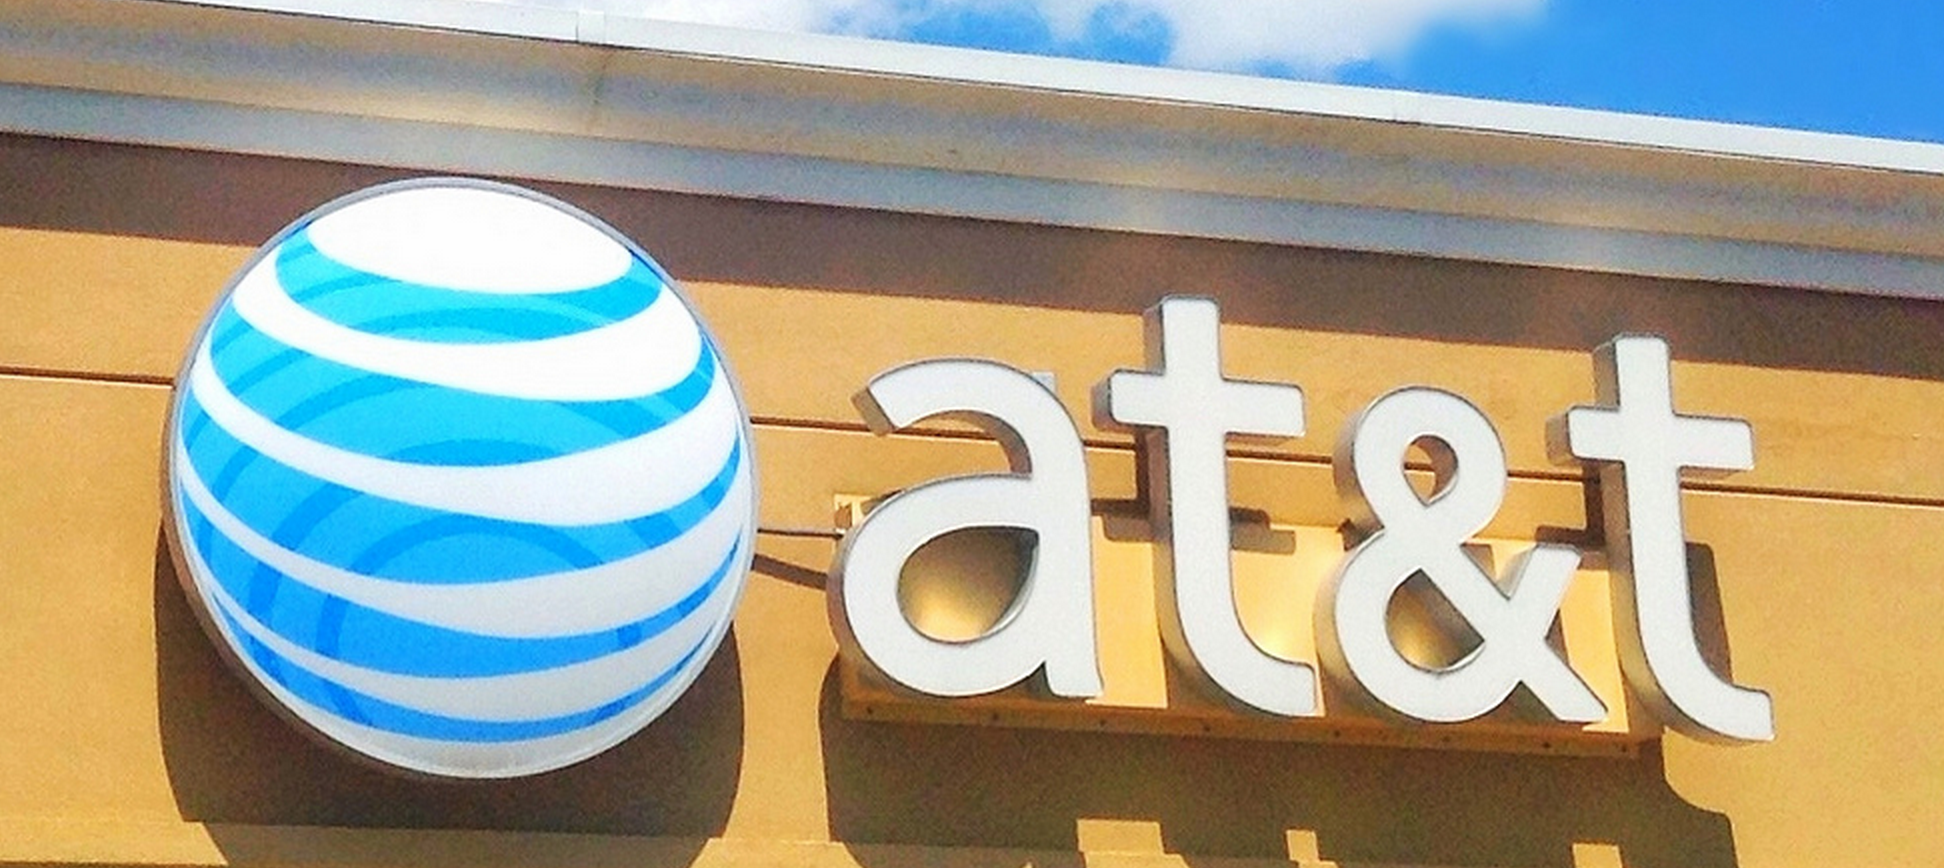 Report: AT&T Wireless Program To Let Subscribers Get Free Data From Advertisers